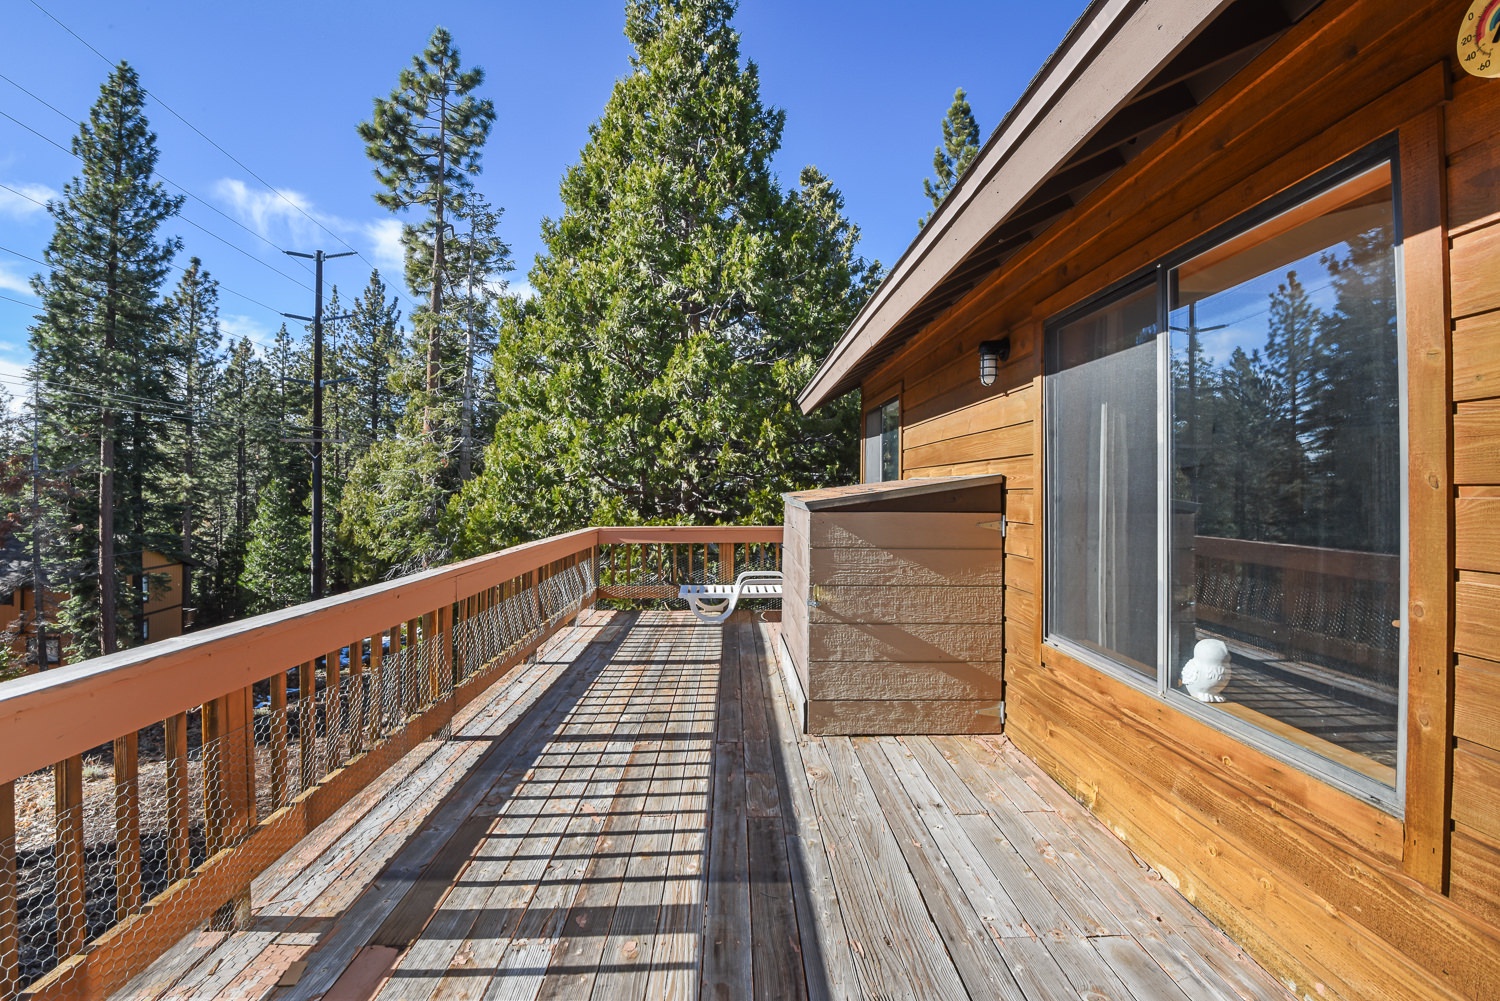 Expansive deck with a breathtaking view